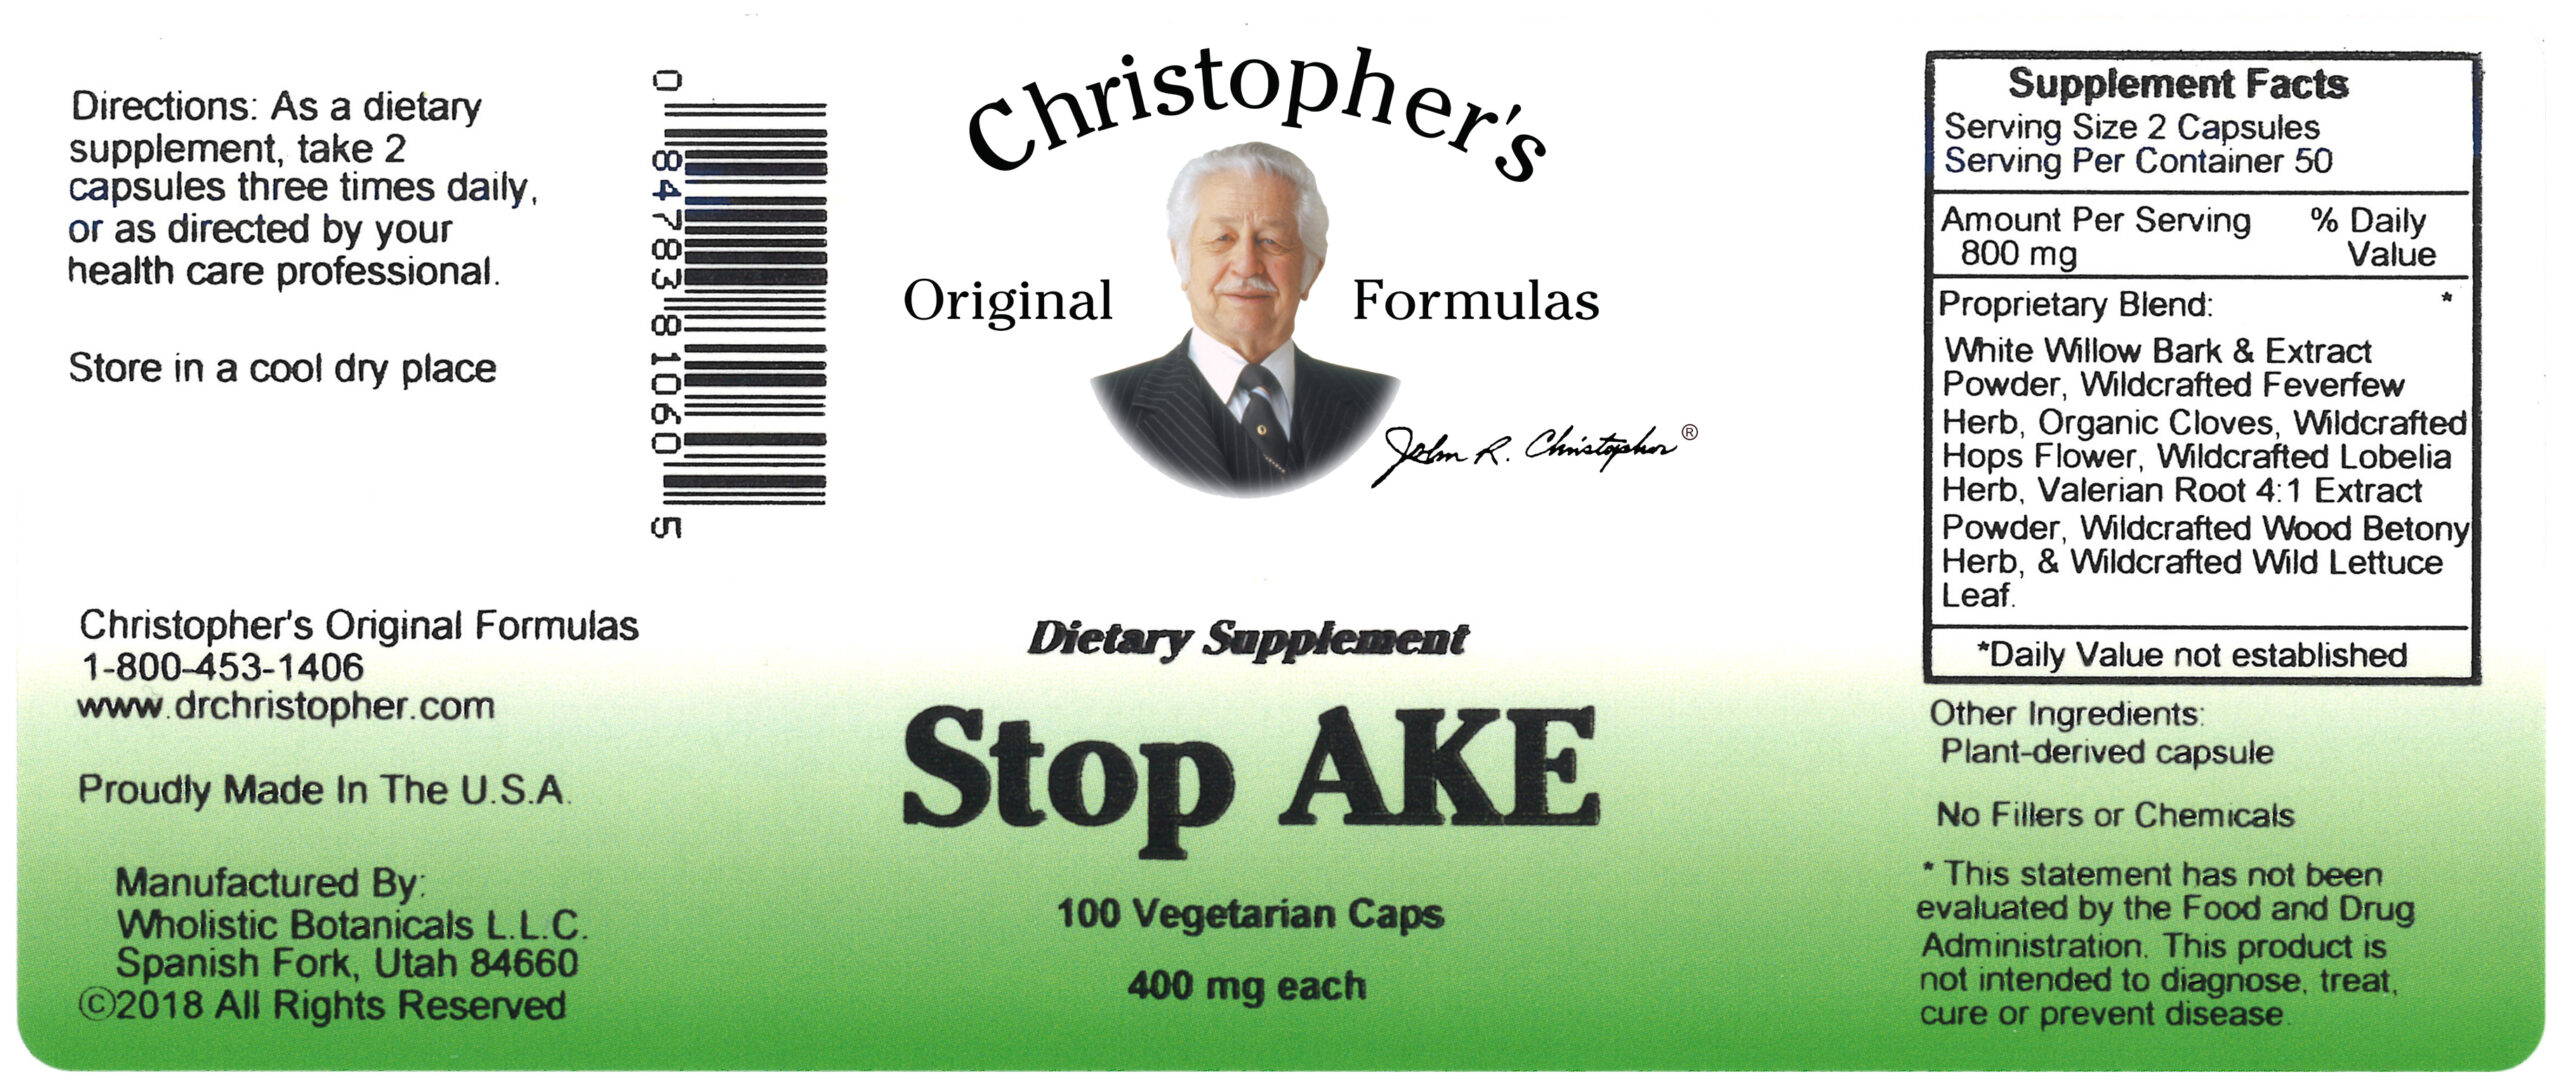 dr christophers stop ake supplement facts